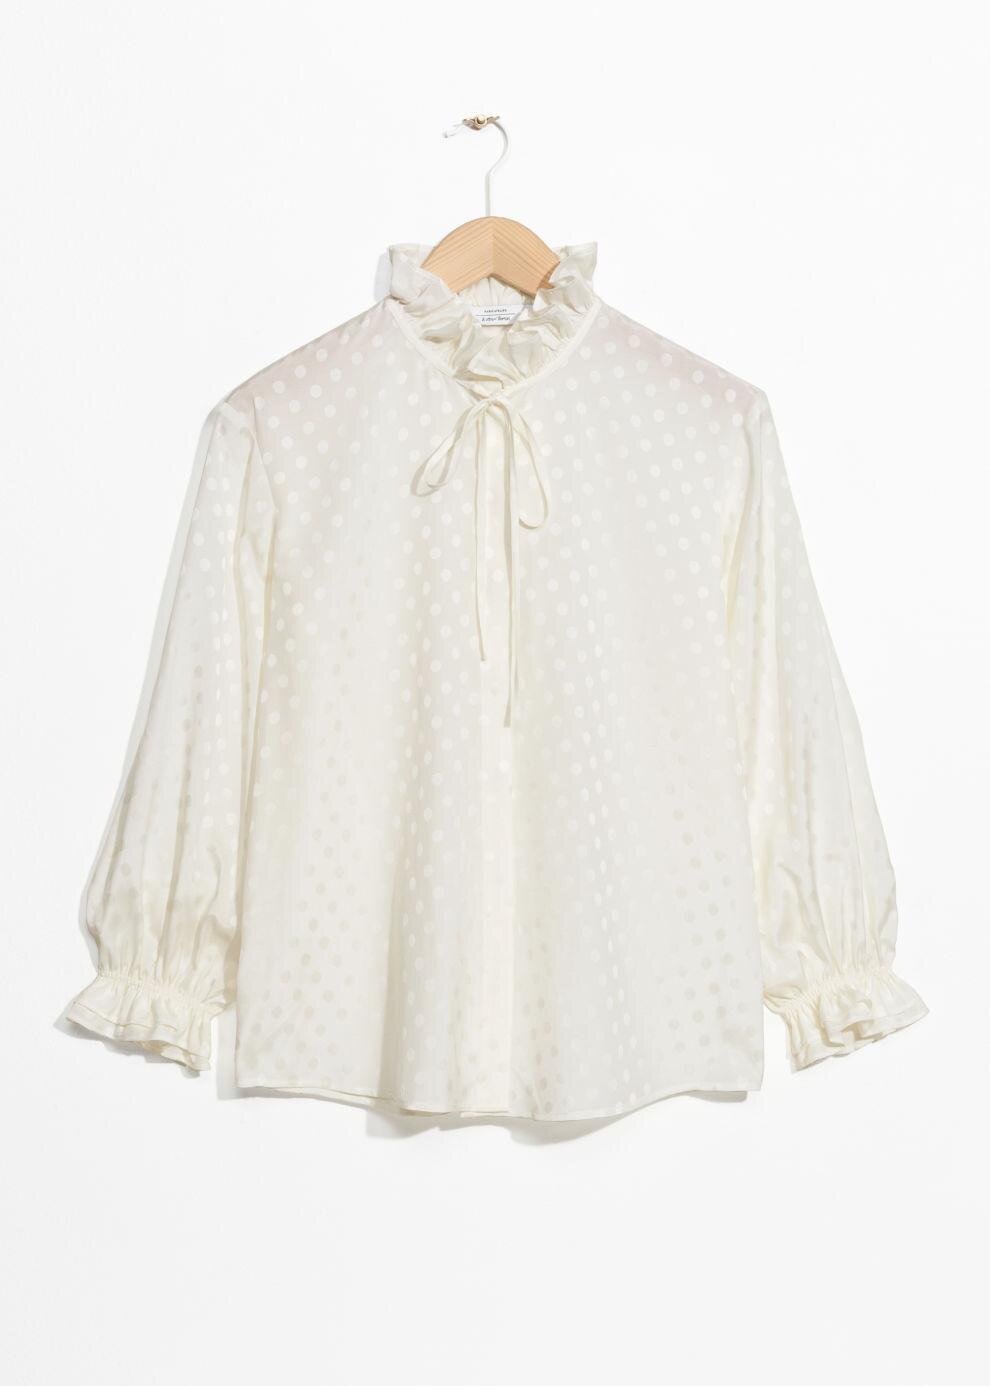 Definitive exile Lure & Other Stories Ruffle Collar Blouse — UFO No More